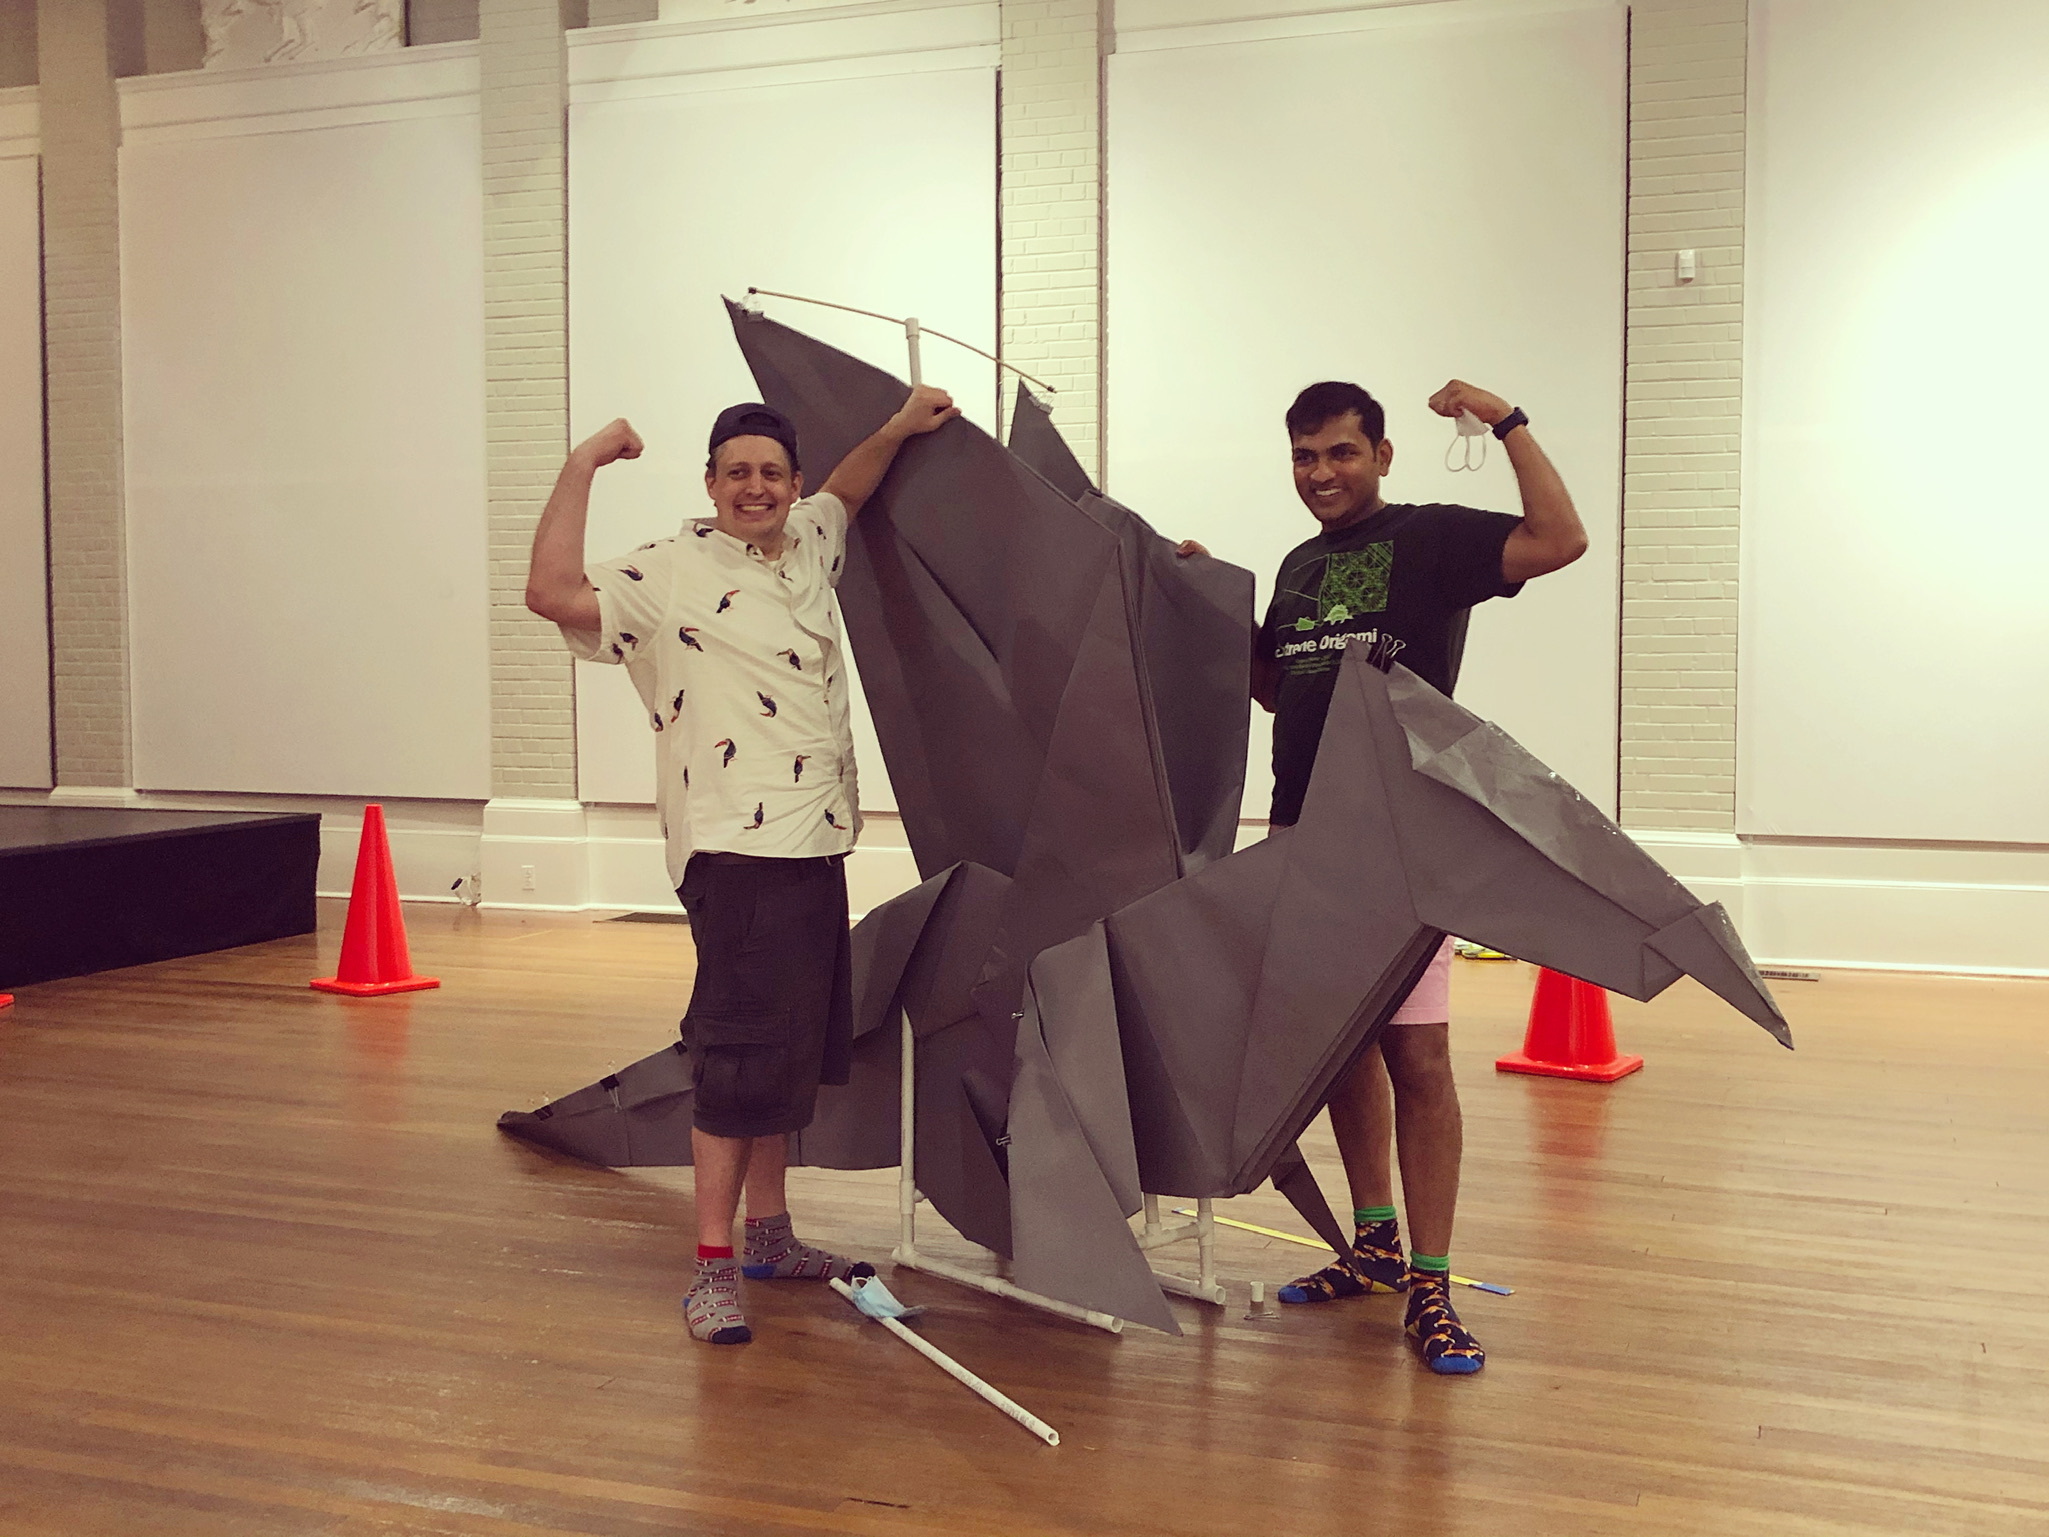 Shrikant Iyer and Paul Frasco recently built the world's largest origami dragon at the Southampton Arts Center.